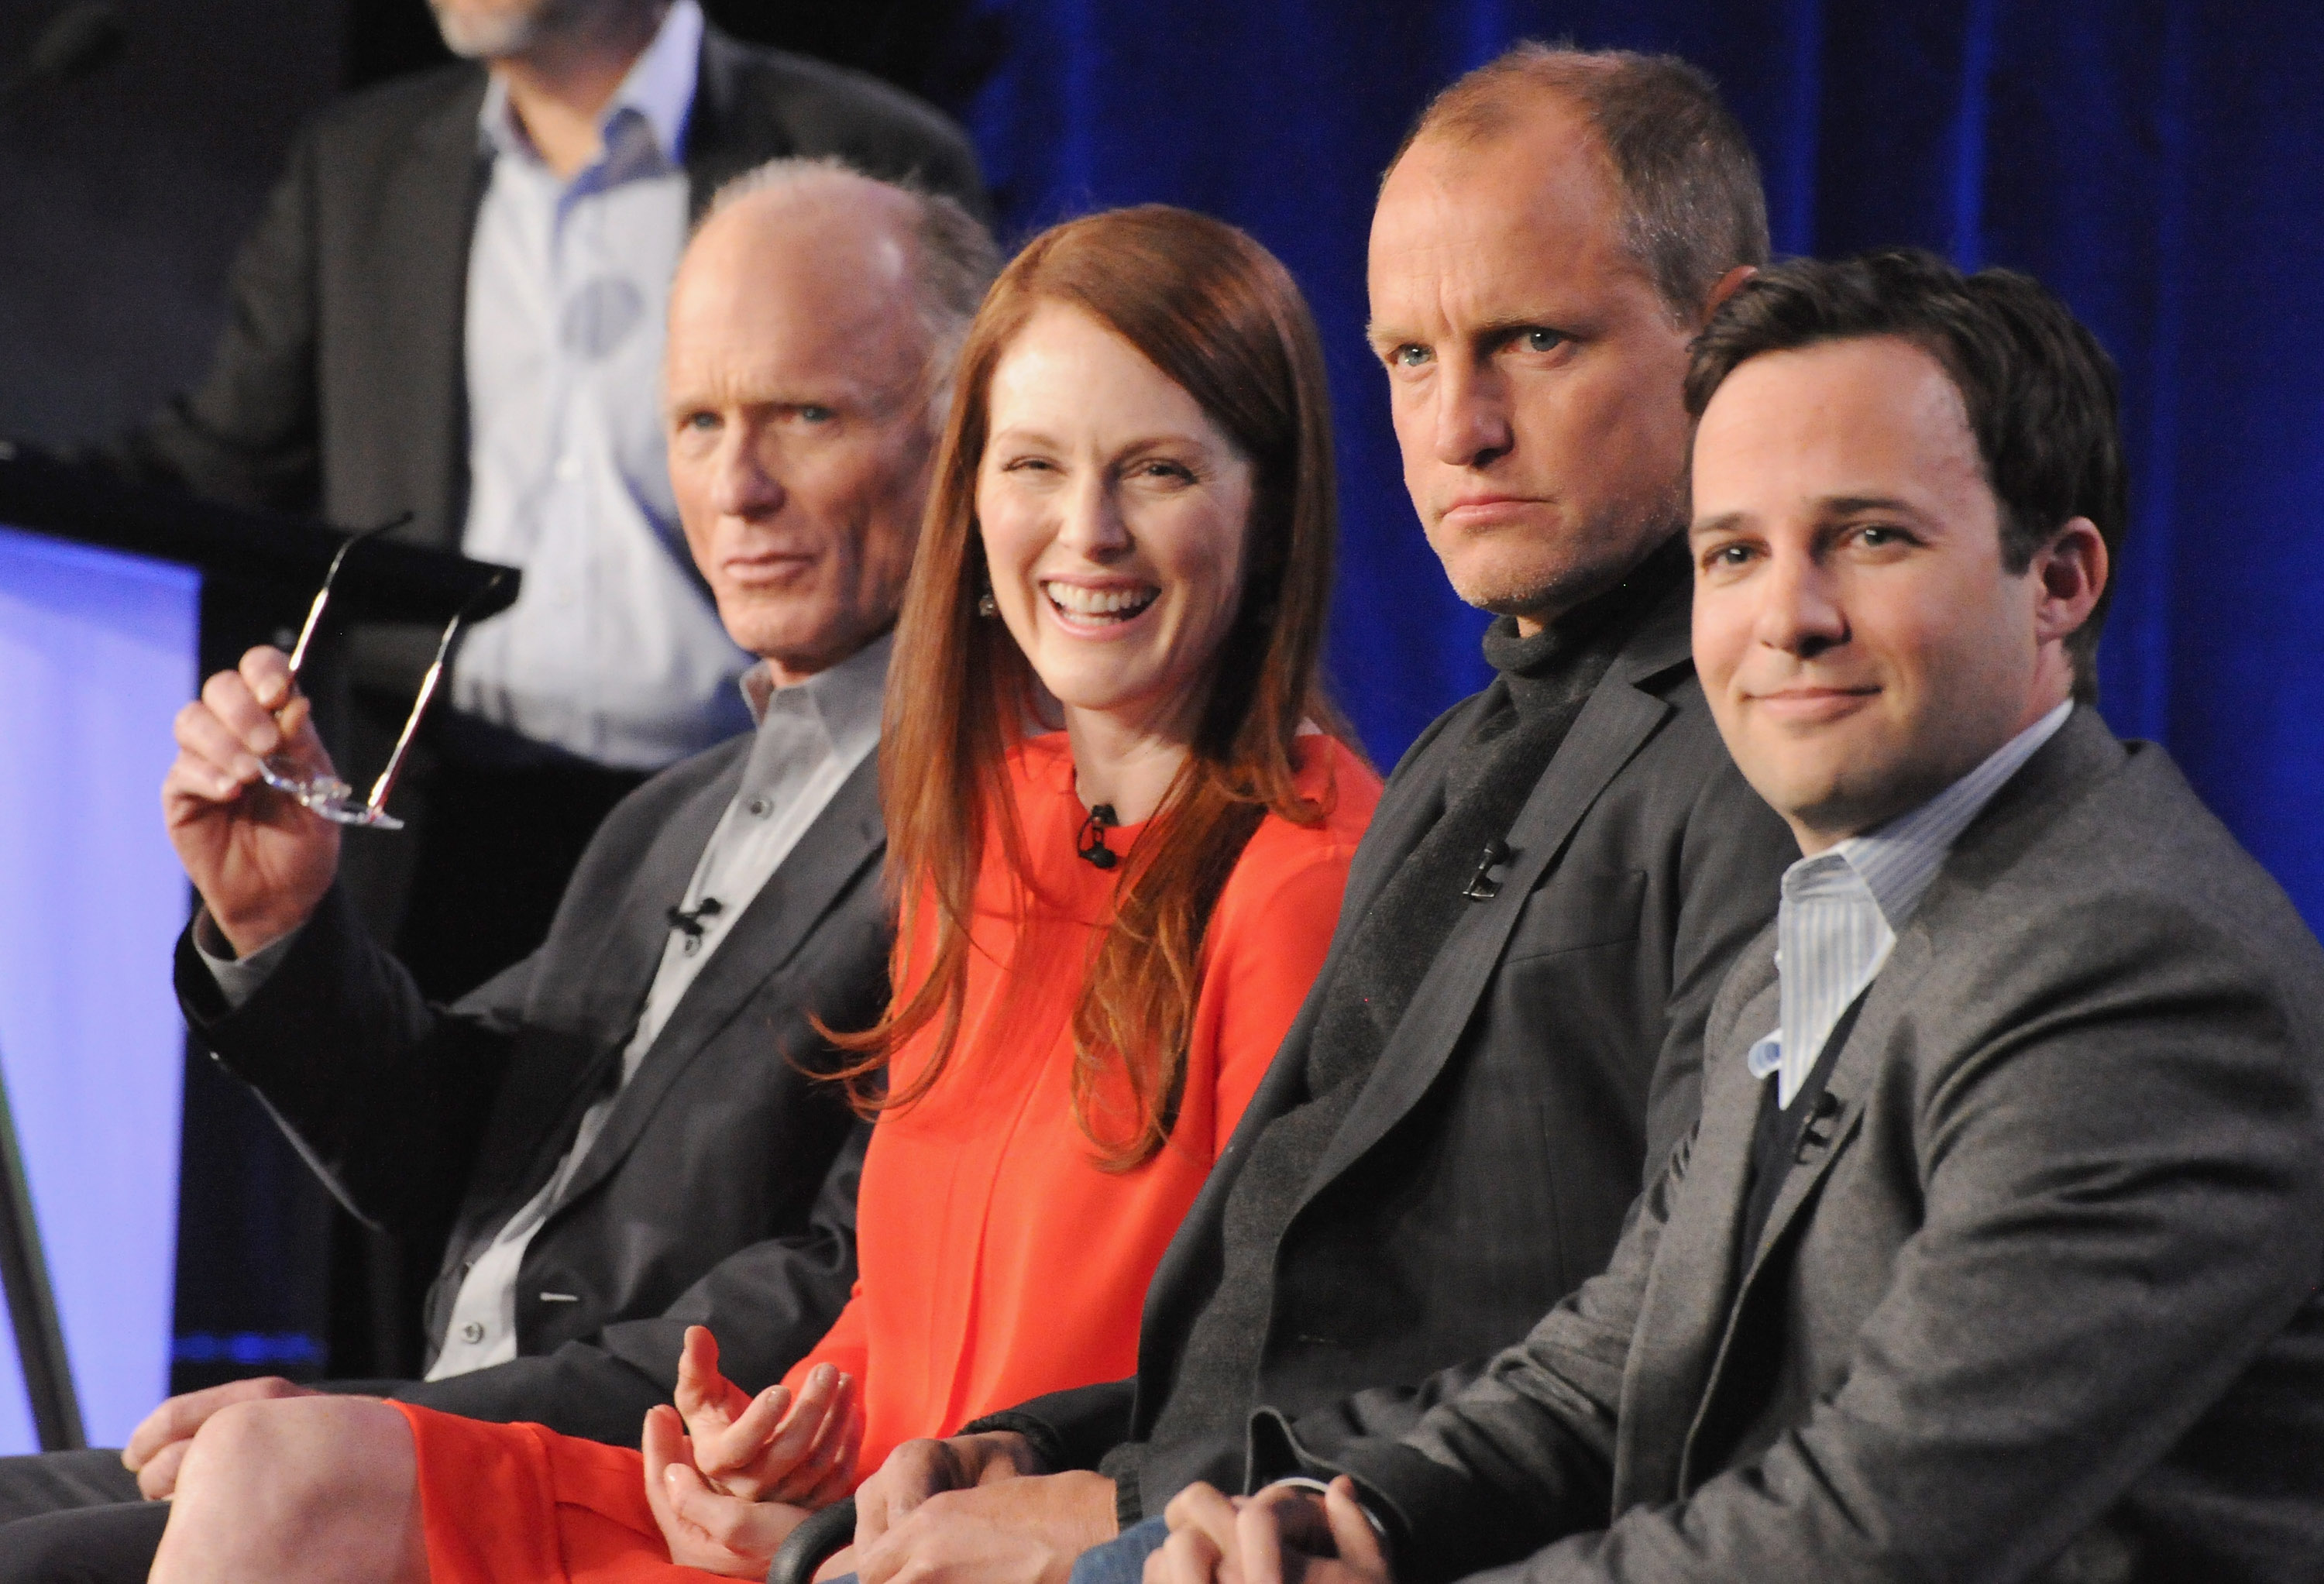 Ed Harris, Julianne Moore, Woody Harrelson and Danny Strong at TCA Game Change panel.